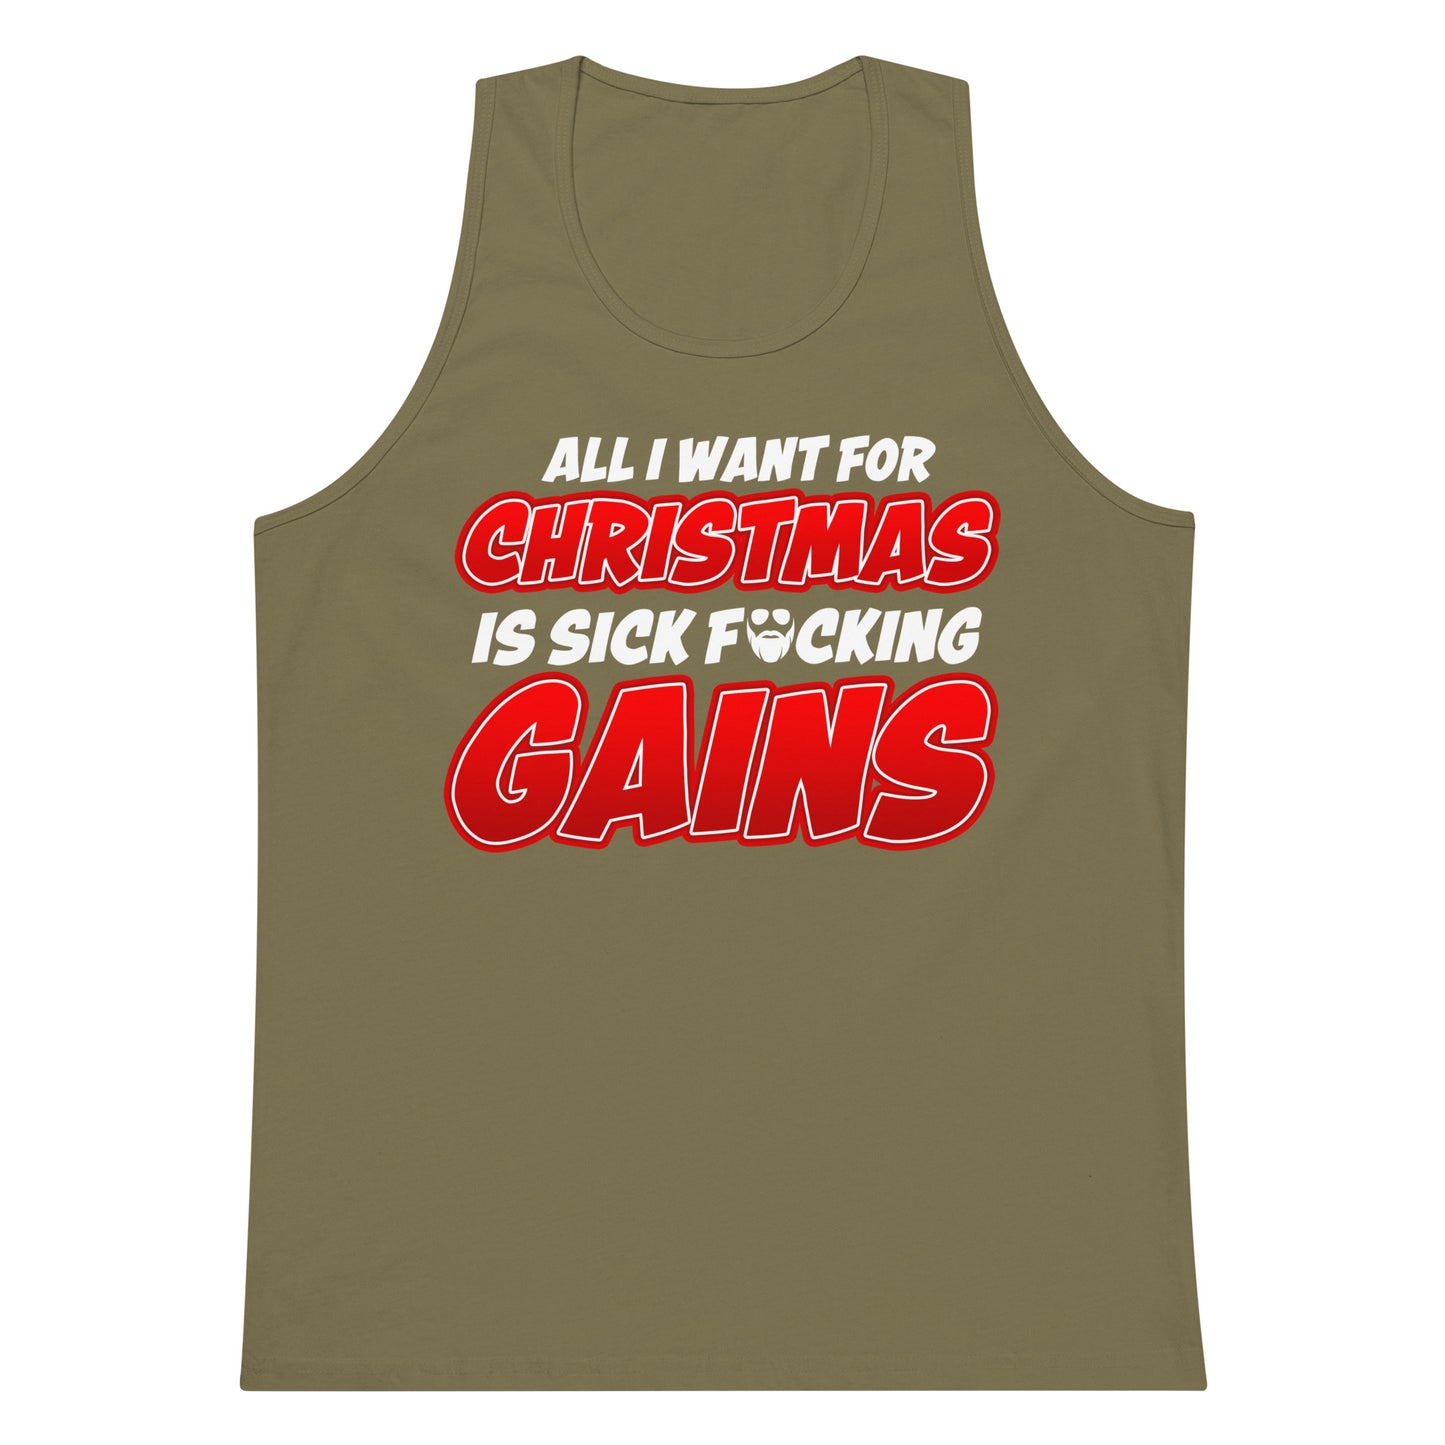 Al l Want For Christmas Is Sick F*cking Gains Premium Tank Top